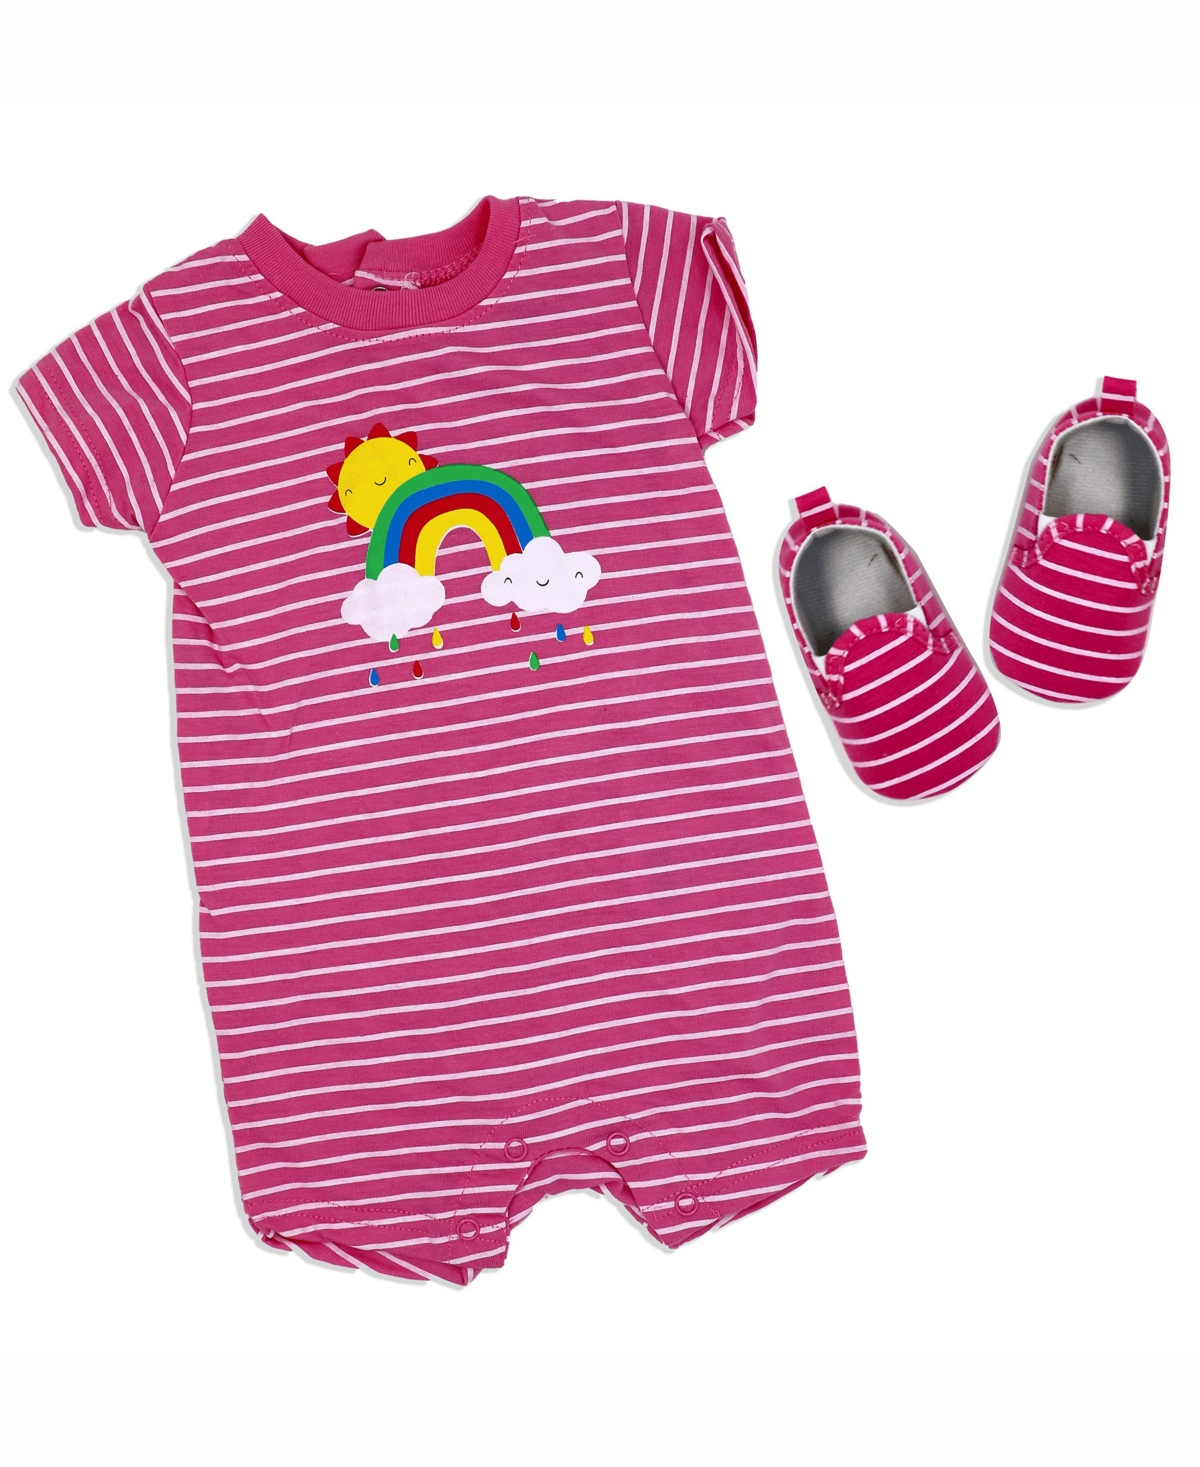 Lily & Jack Baby Girls Short Sleeved Rainbow Romper And Shoes, 2 Piece Set In Pink